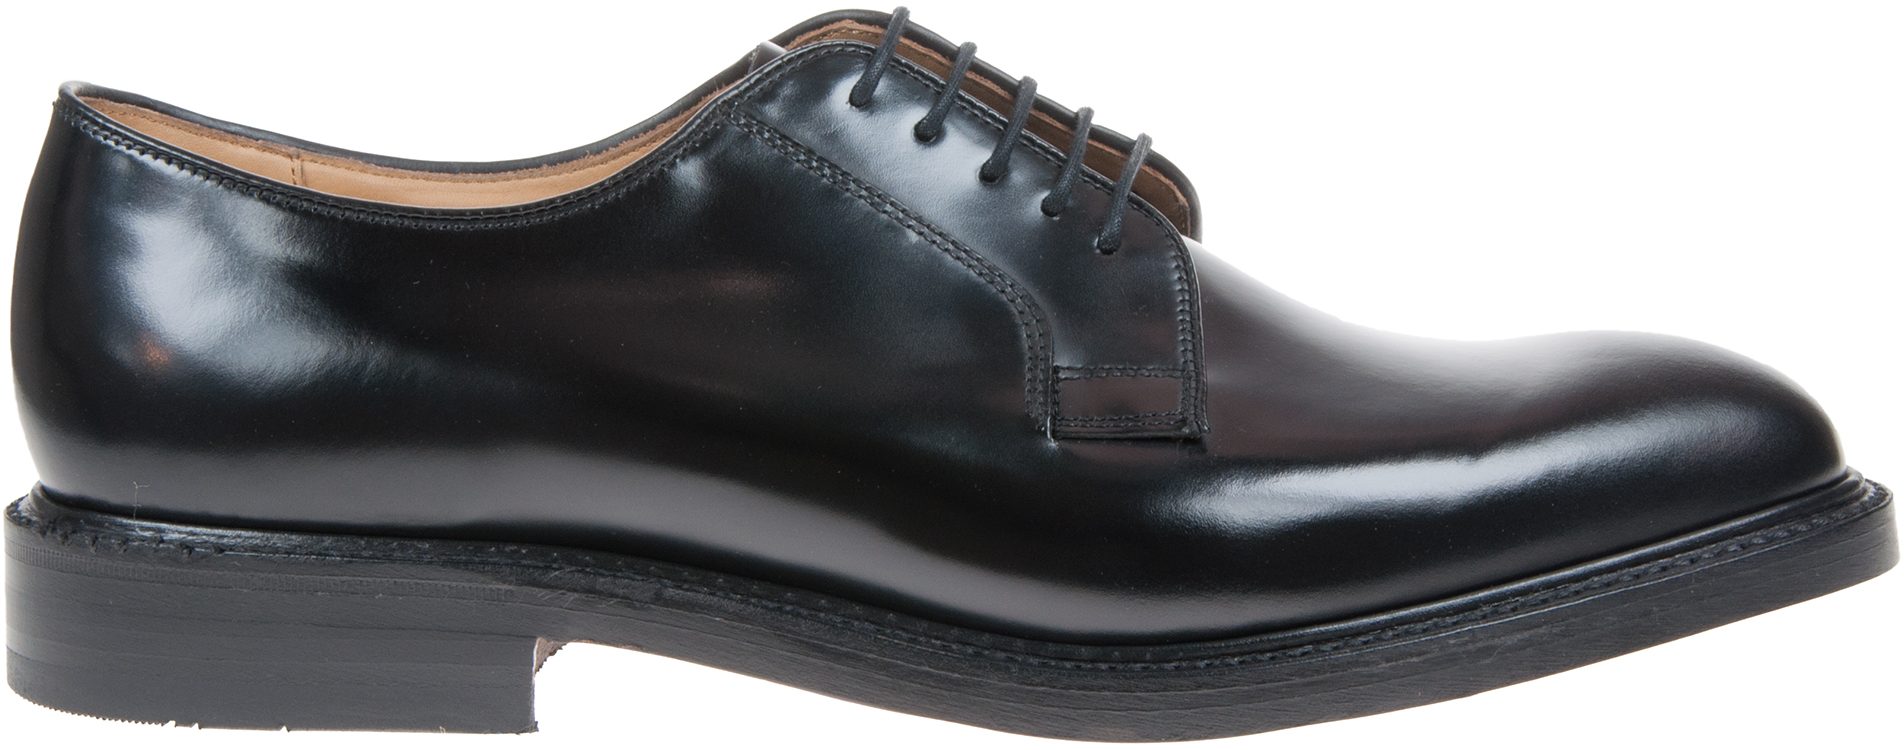 Loake 771 Black Polished Leather 771B - Formal Shoes - Humphries Shoes